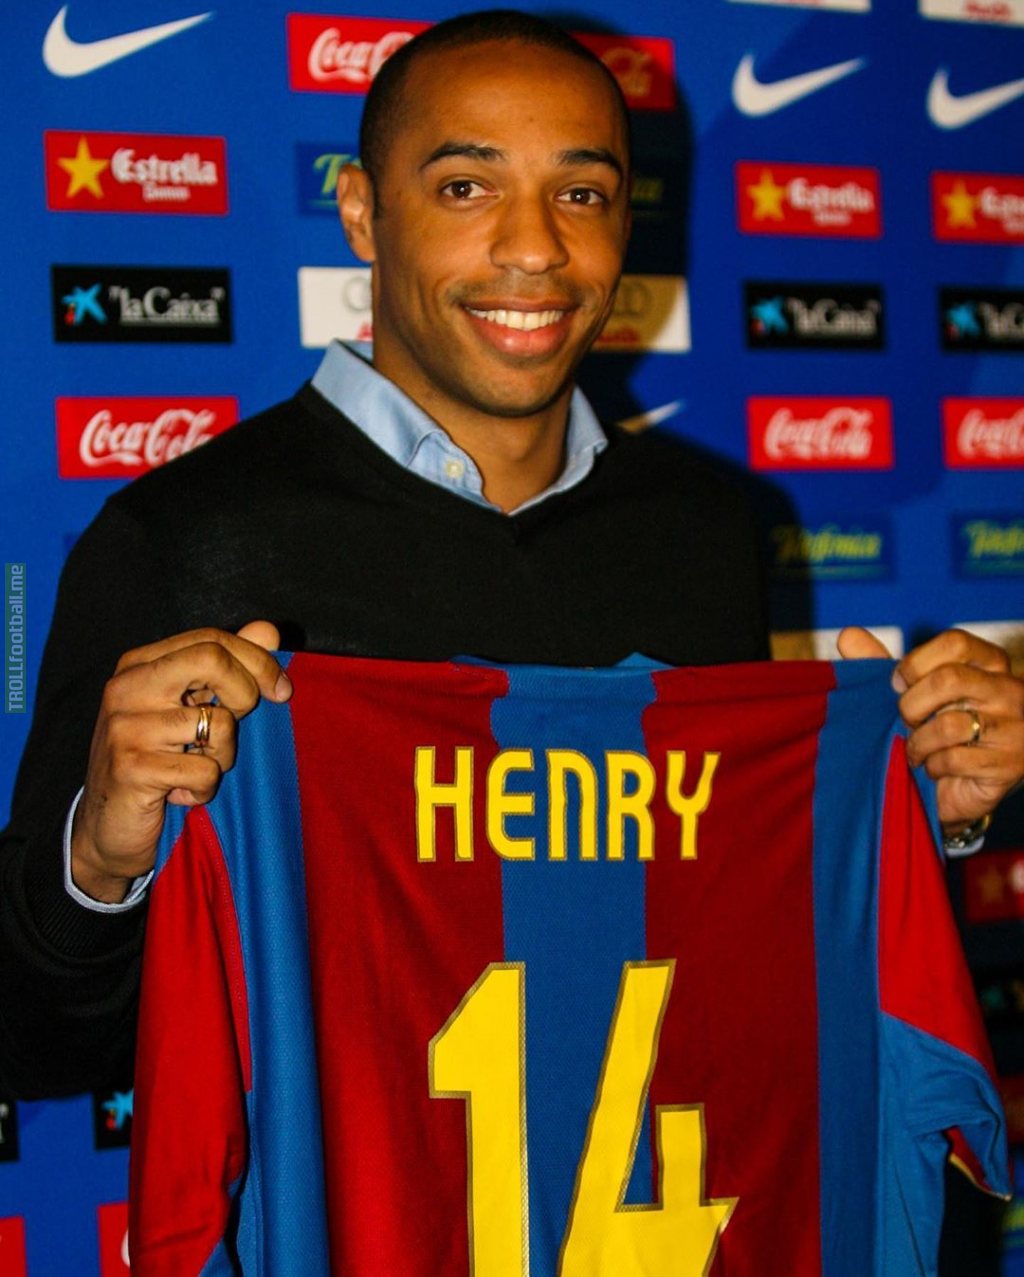 On this day in 2007, Thierry Henry was presented as a Barcelona player.